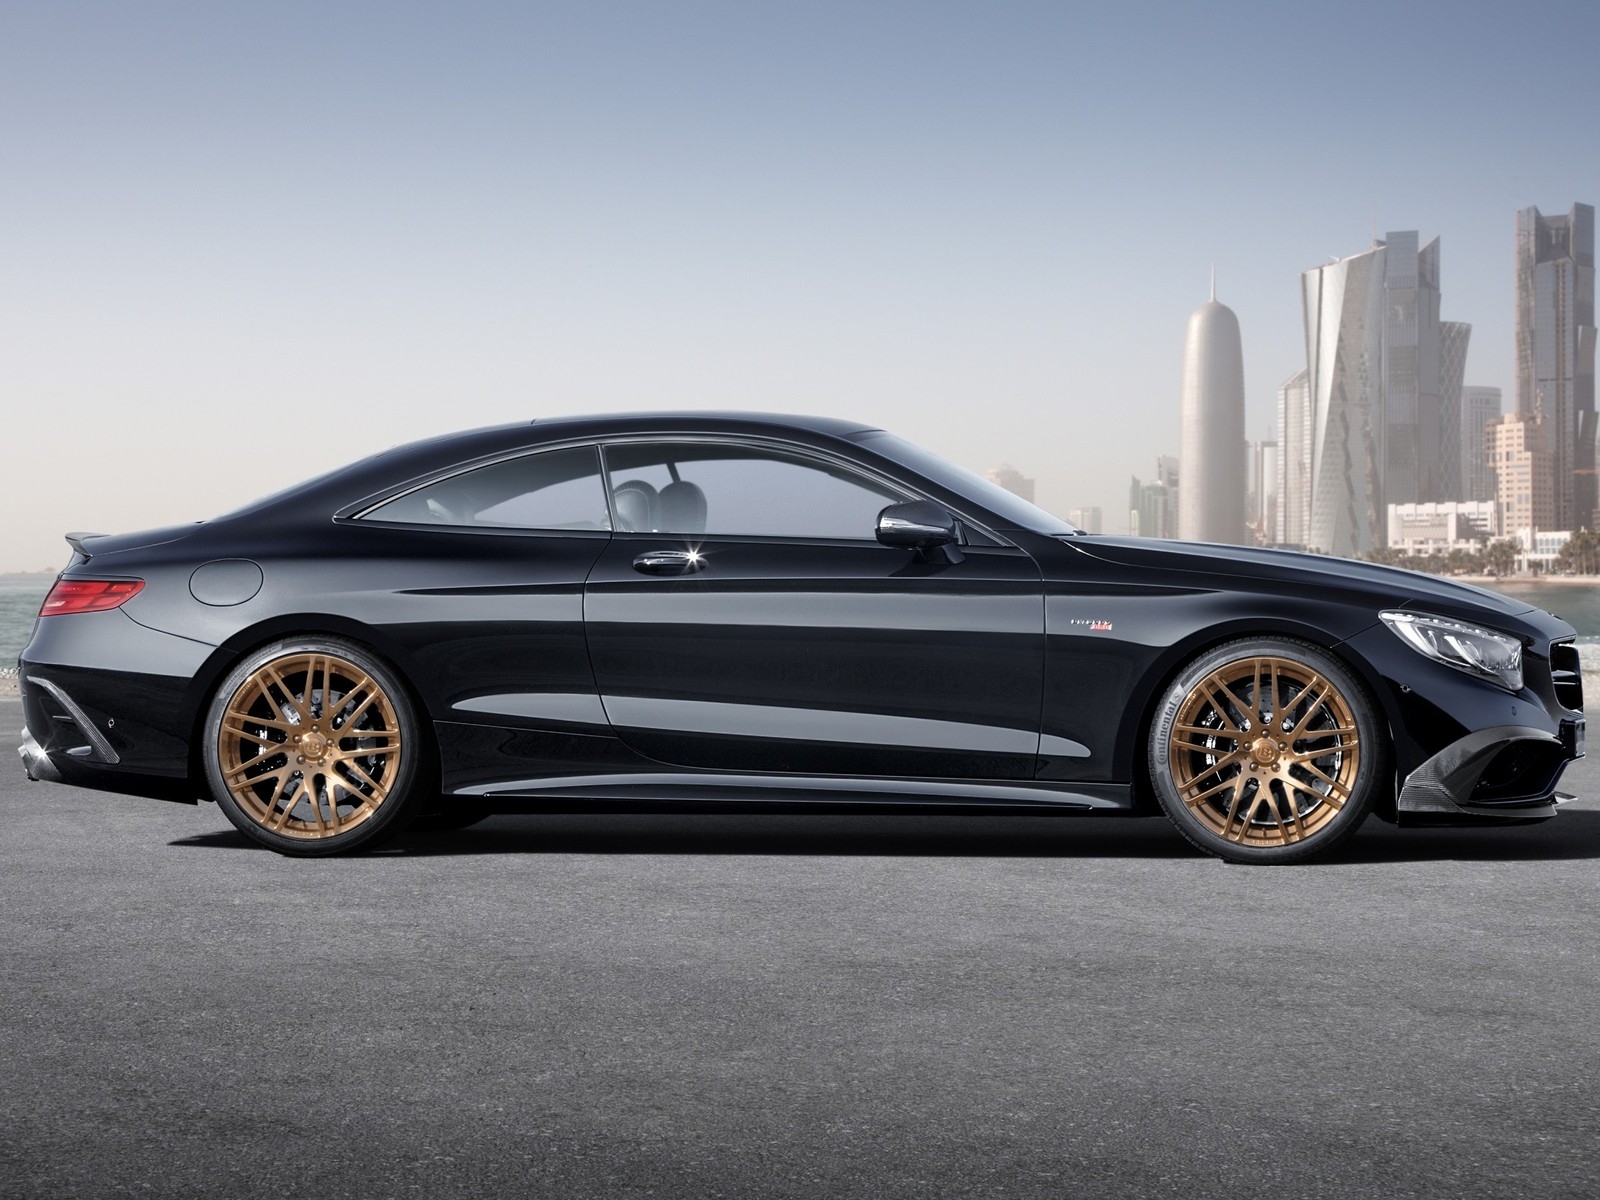 Mercedes Benz S63 AMG Brabus Side View for 1600 x 1200 resolution